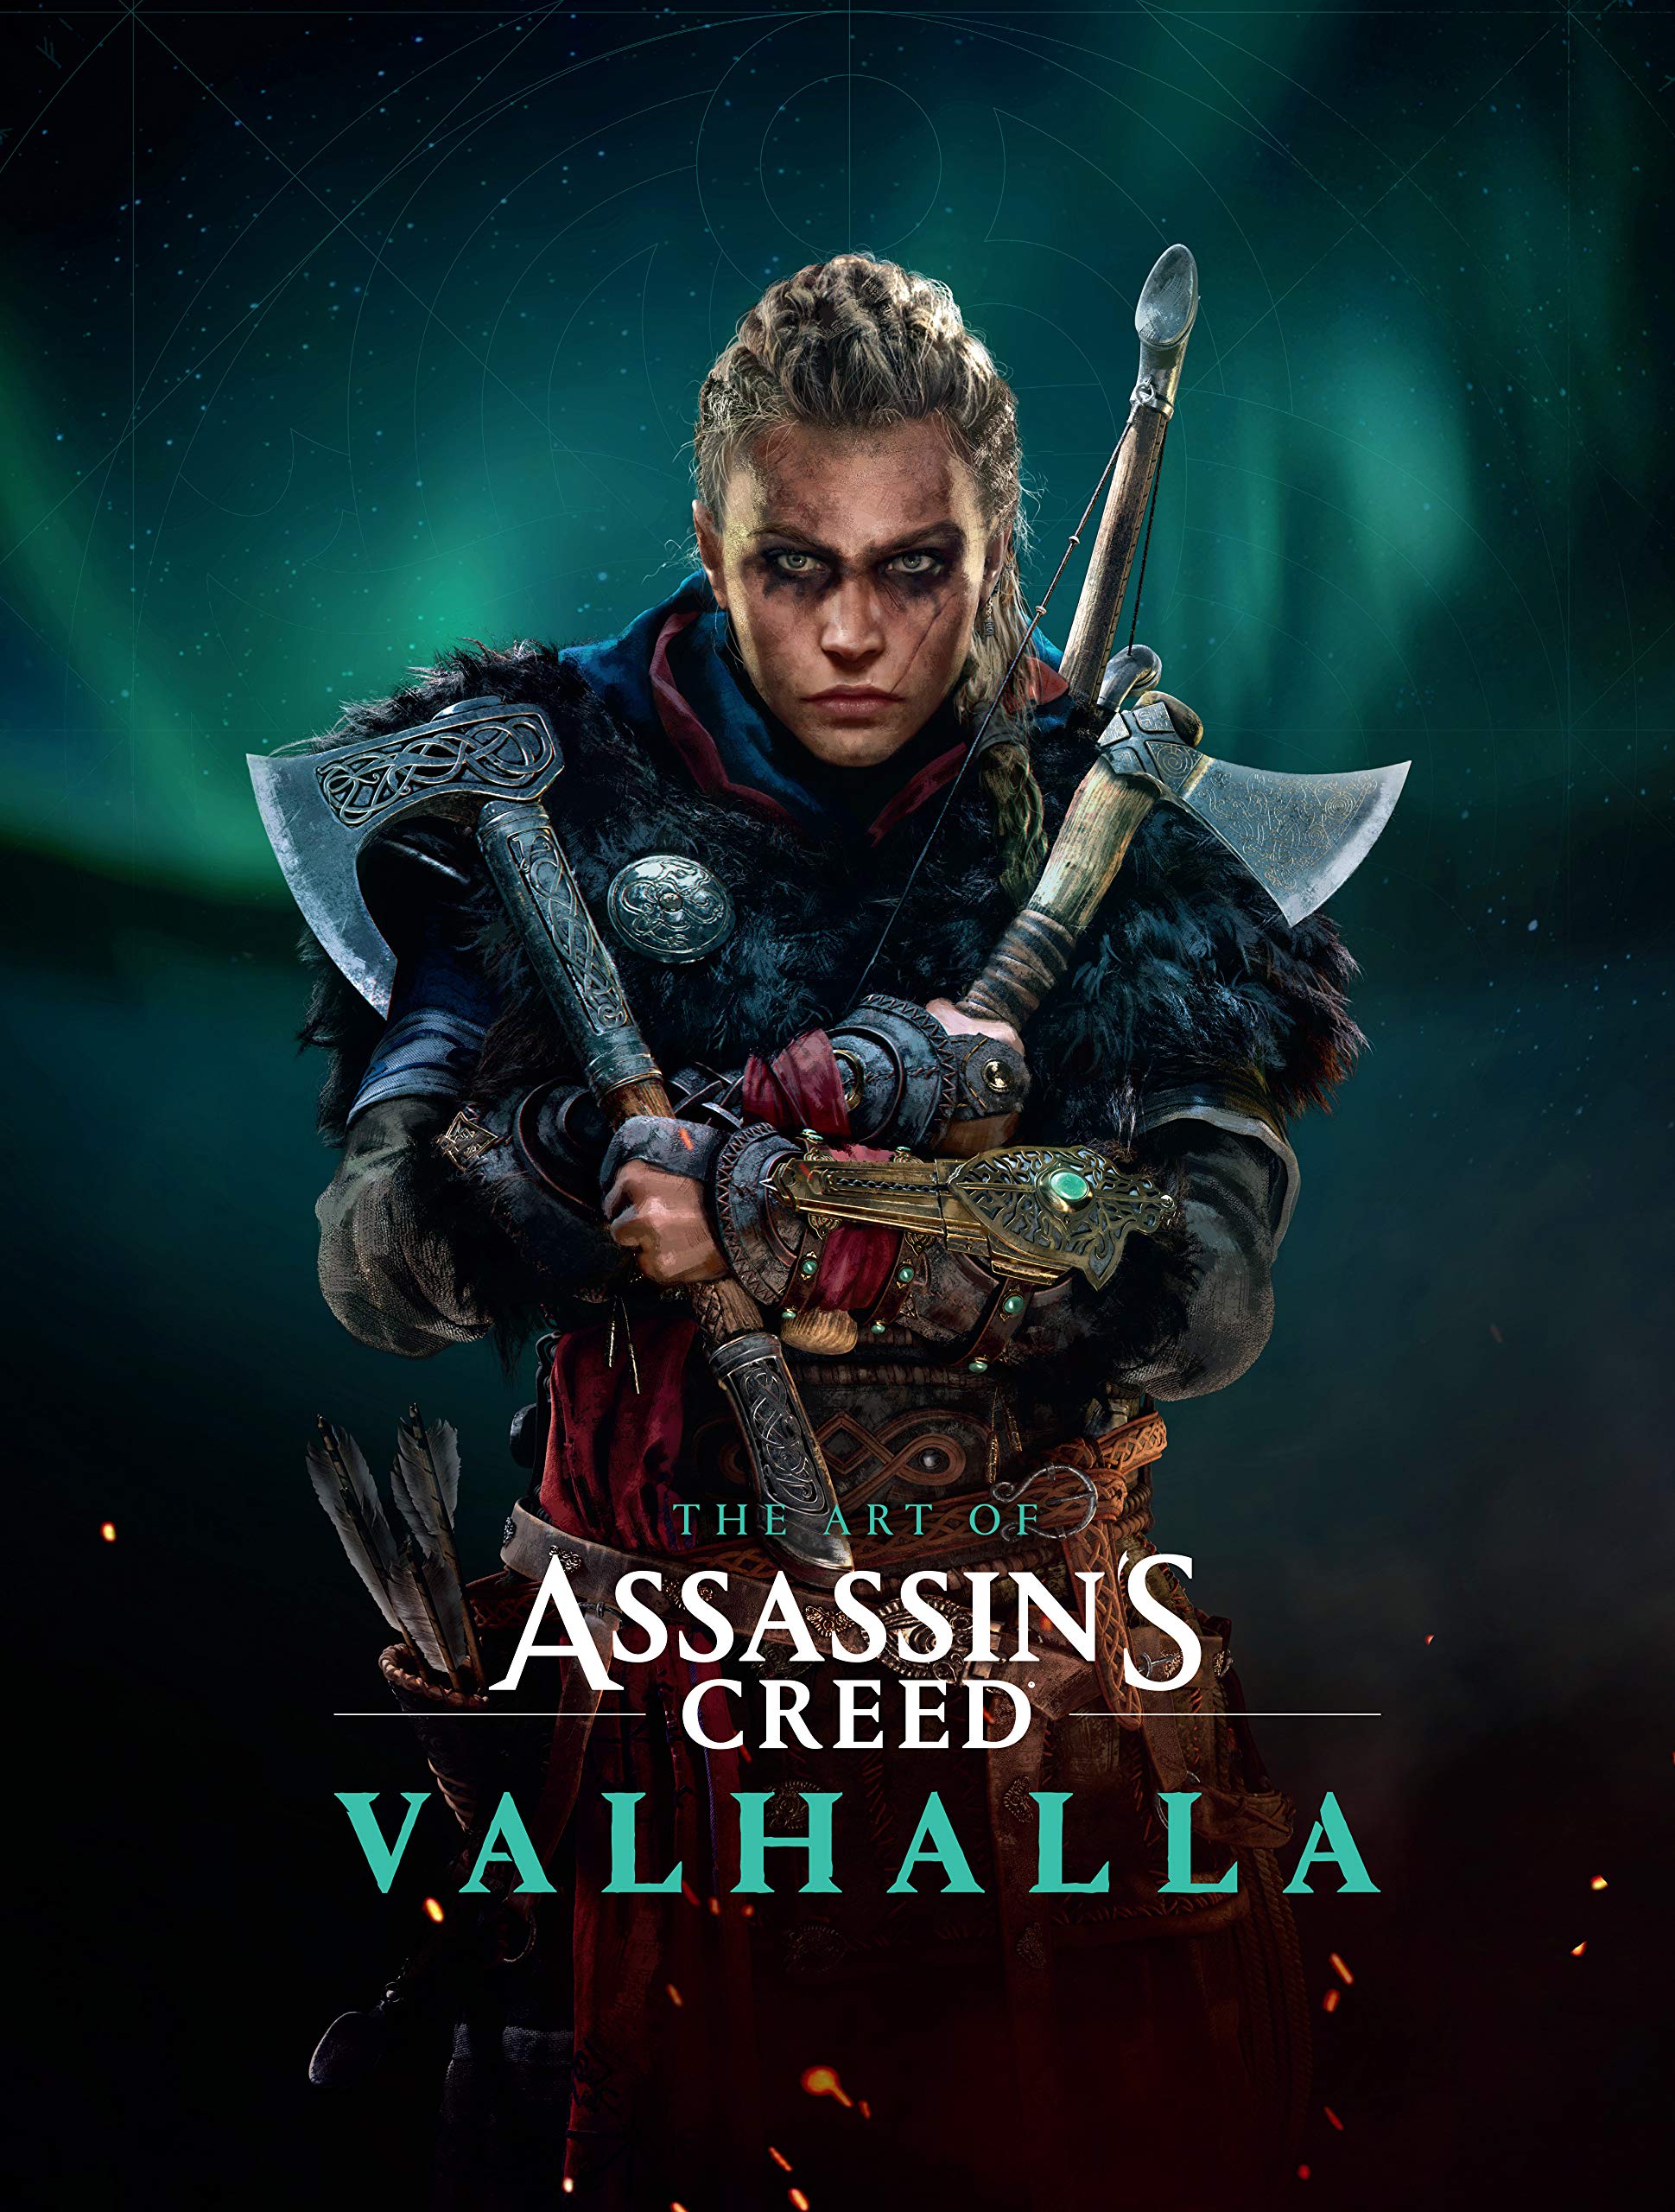 The Art of Assassin's Creed Valhalla Cover Art